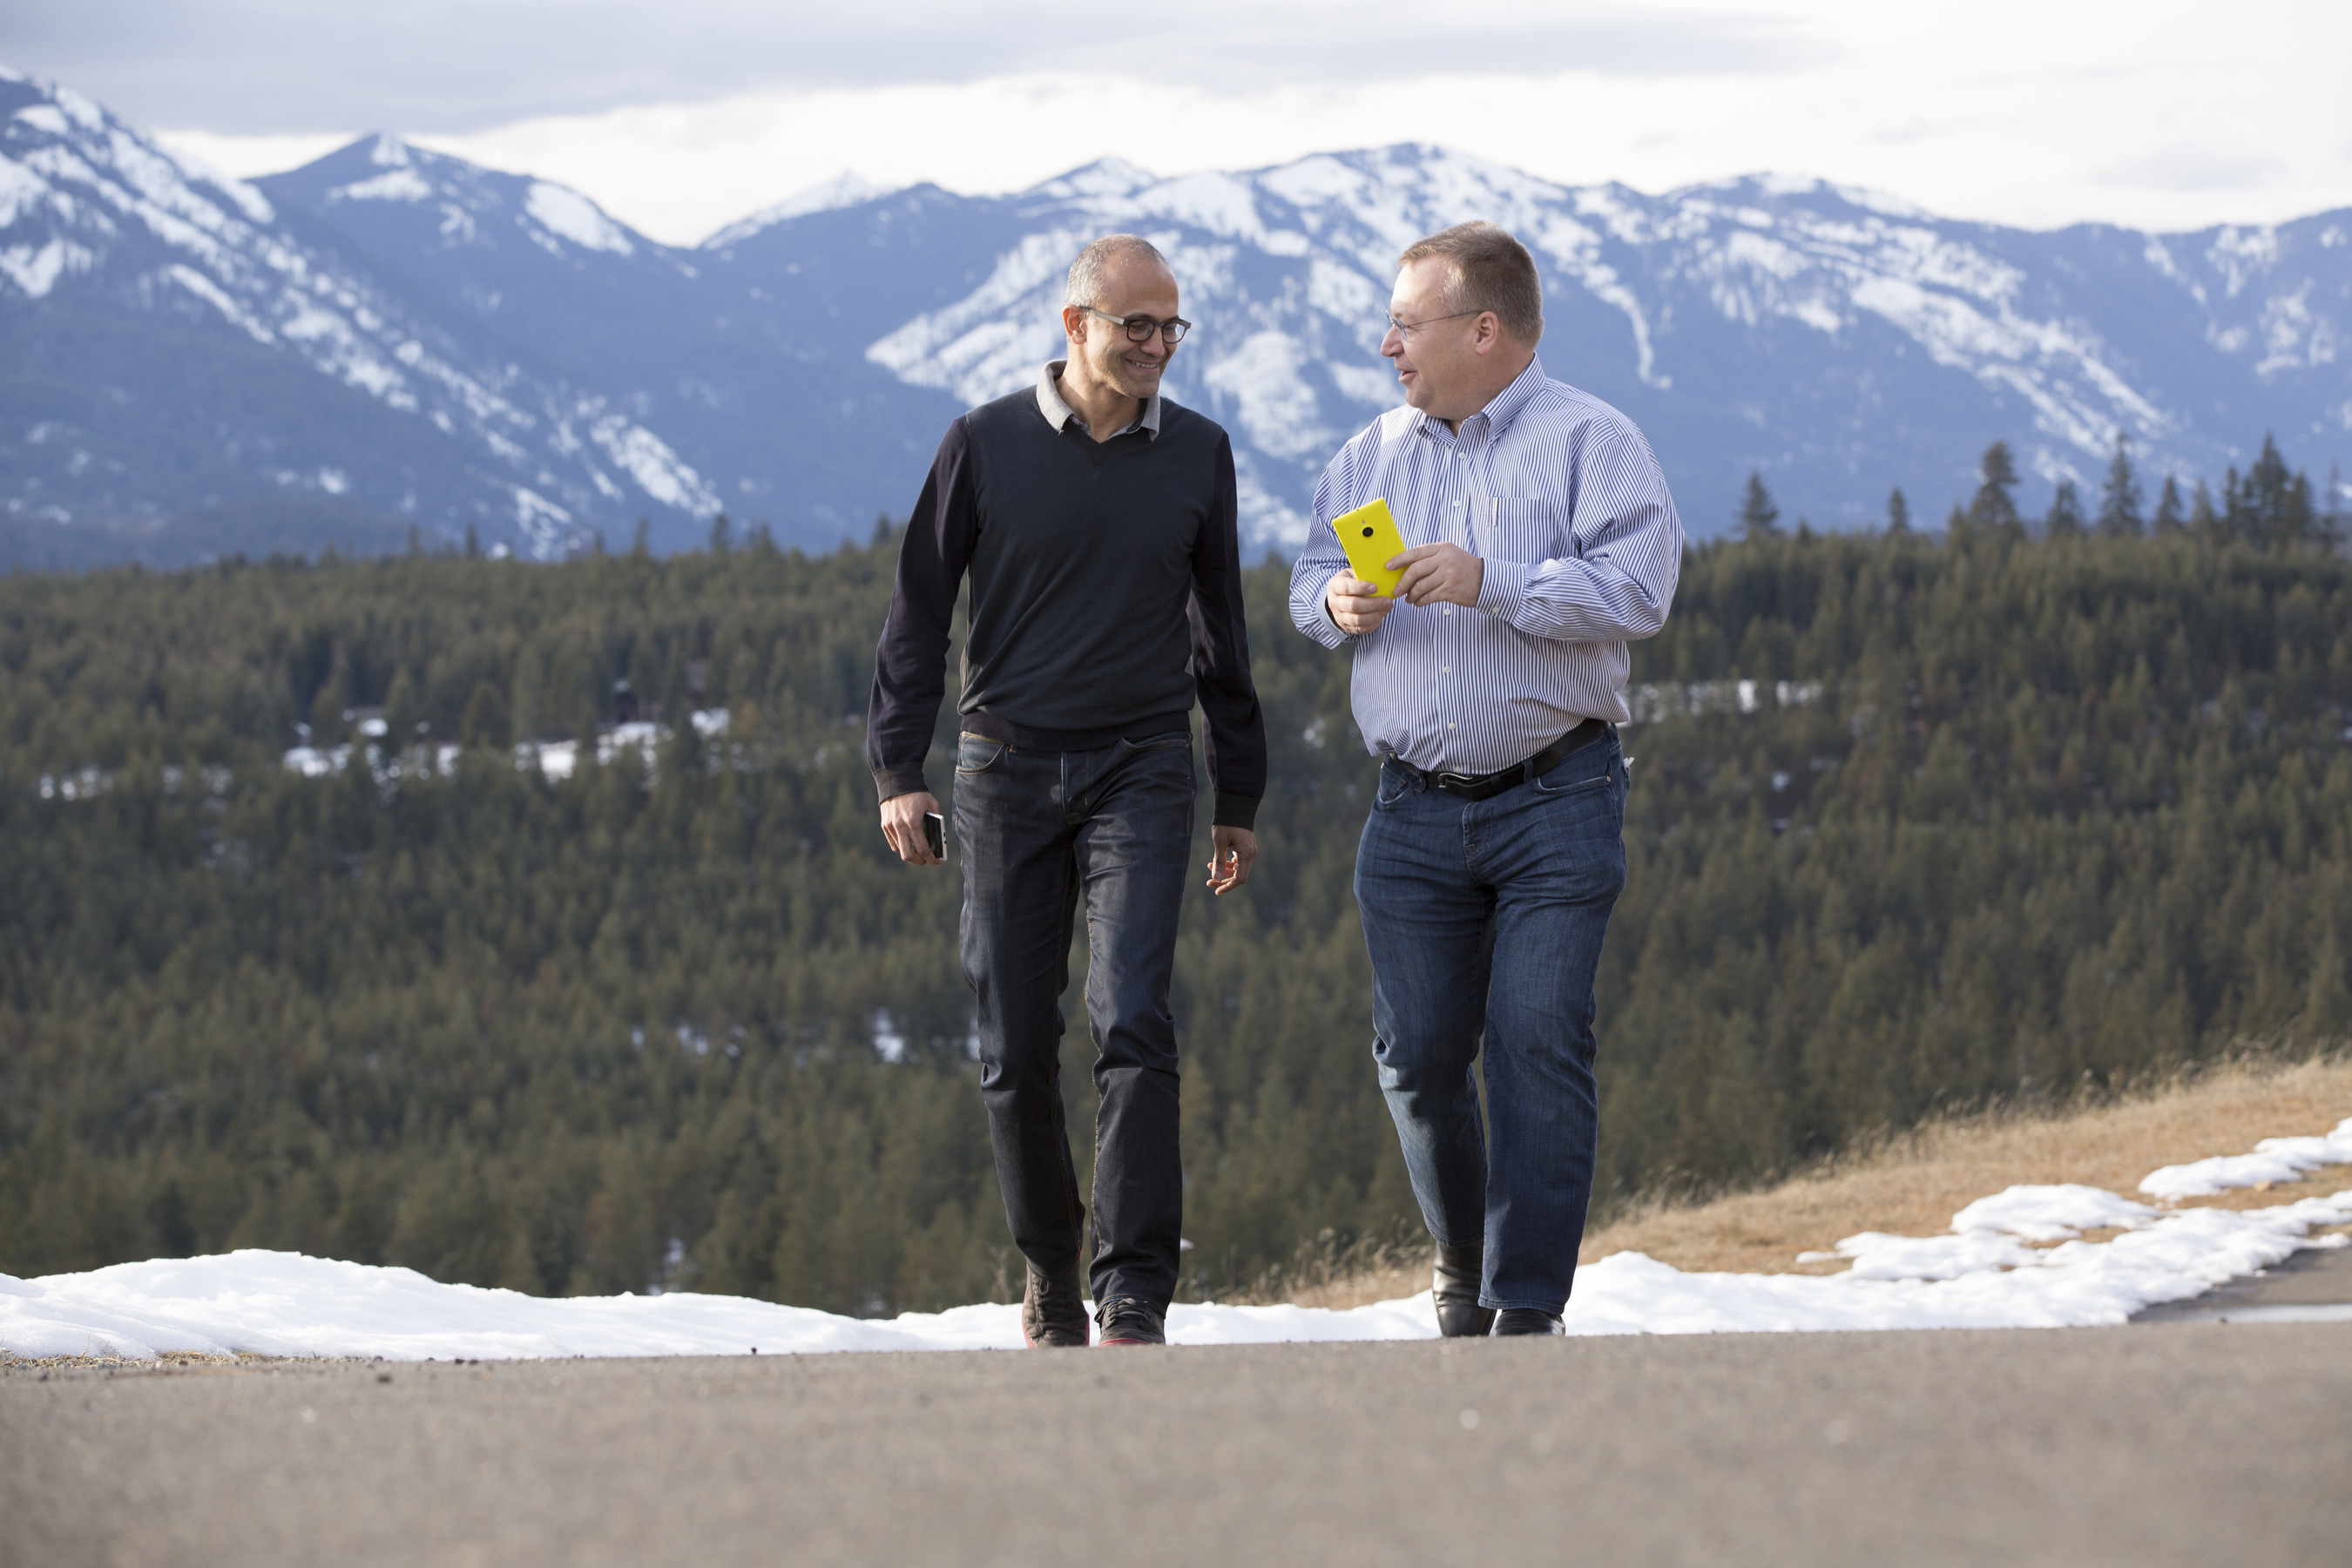 Microsoft CEO Satya Nadella (left) and executive vice president of Microsoft Devices Group Stephen Elop share a moment as the deal that brings together Microsoft and the Nokia Devices and Services business closes today.  (PRNewsFoto/Microsoft Corp.)